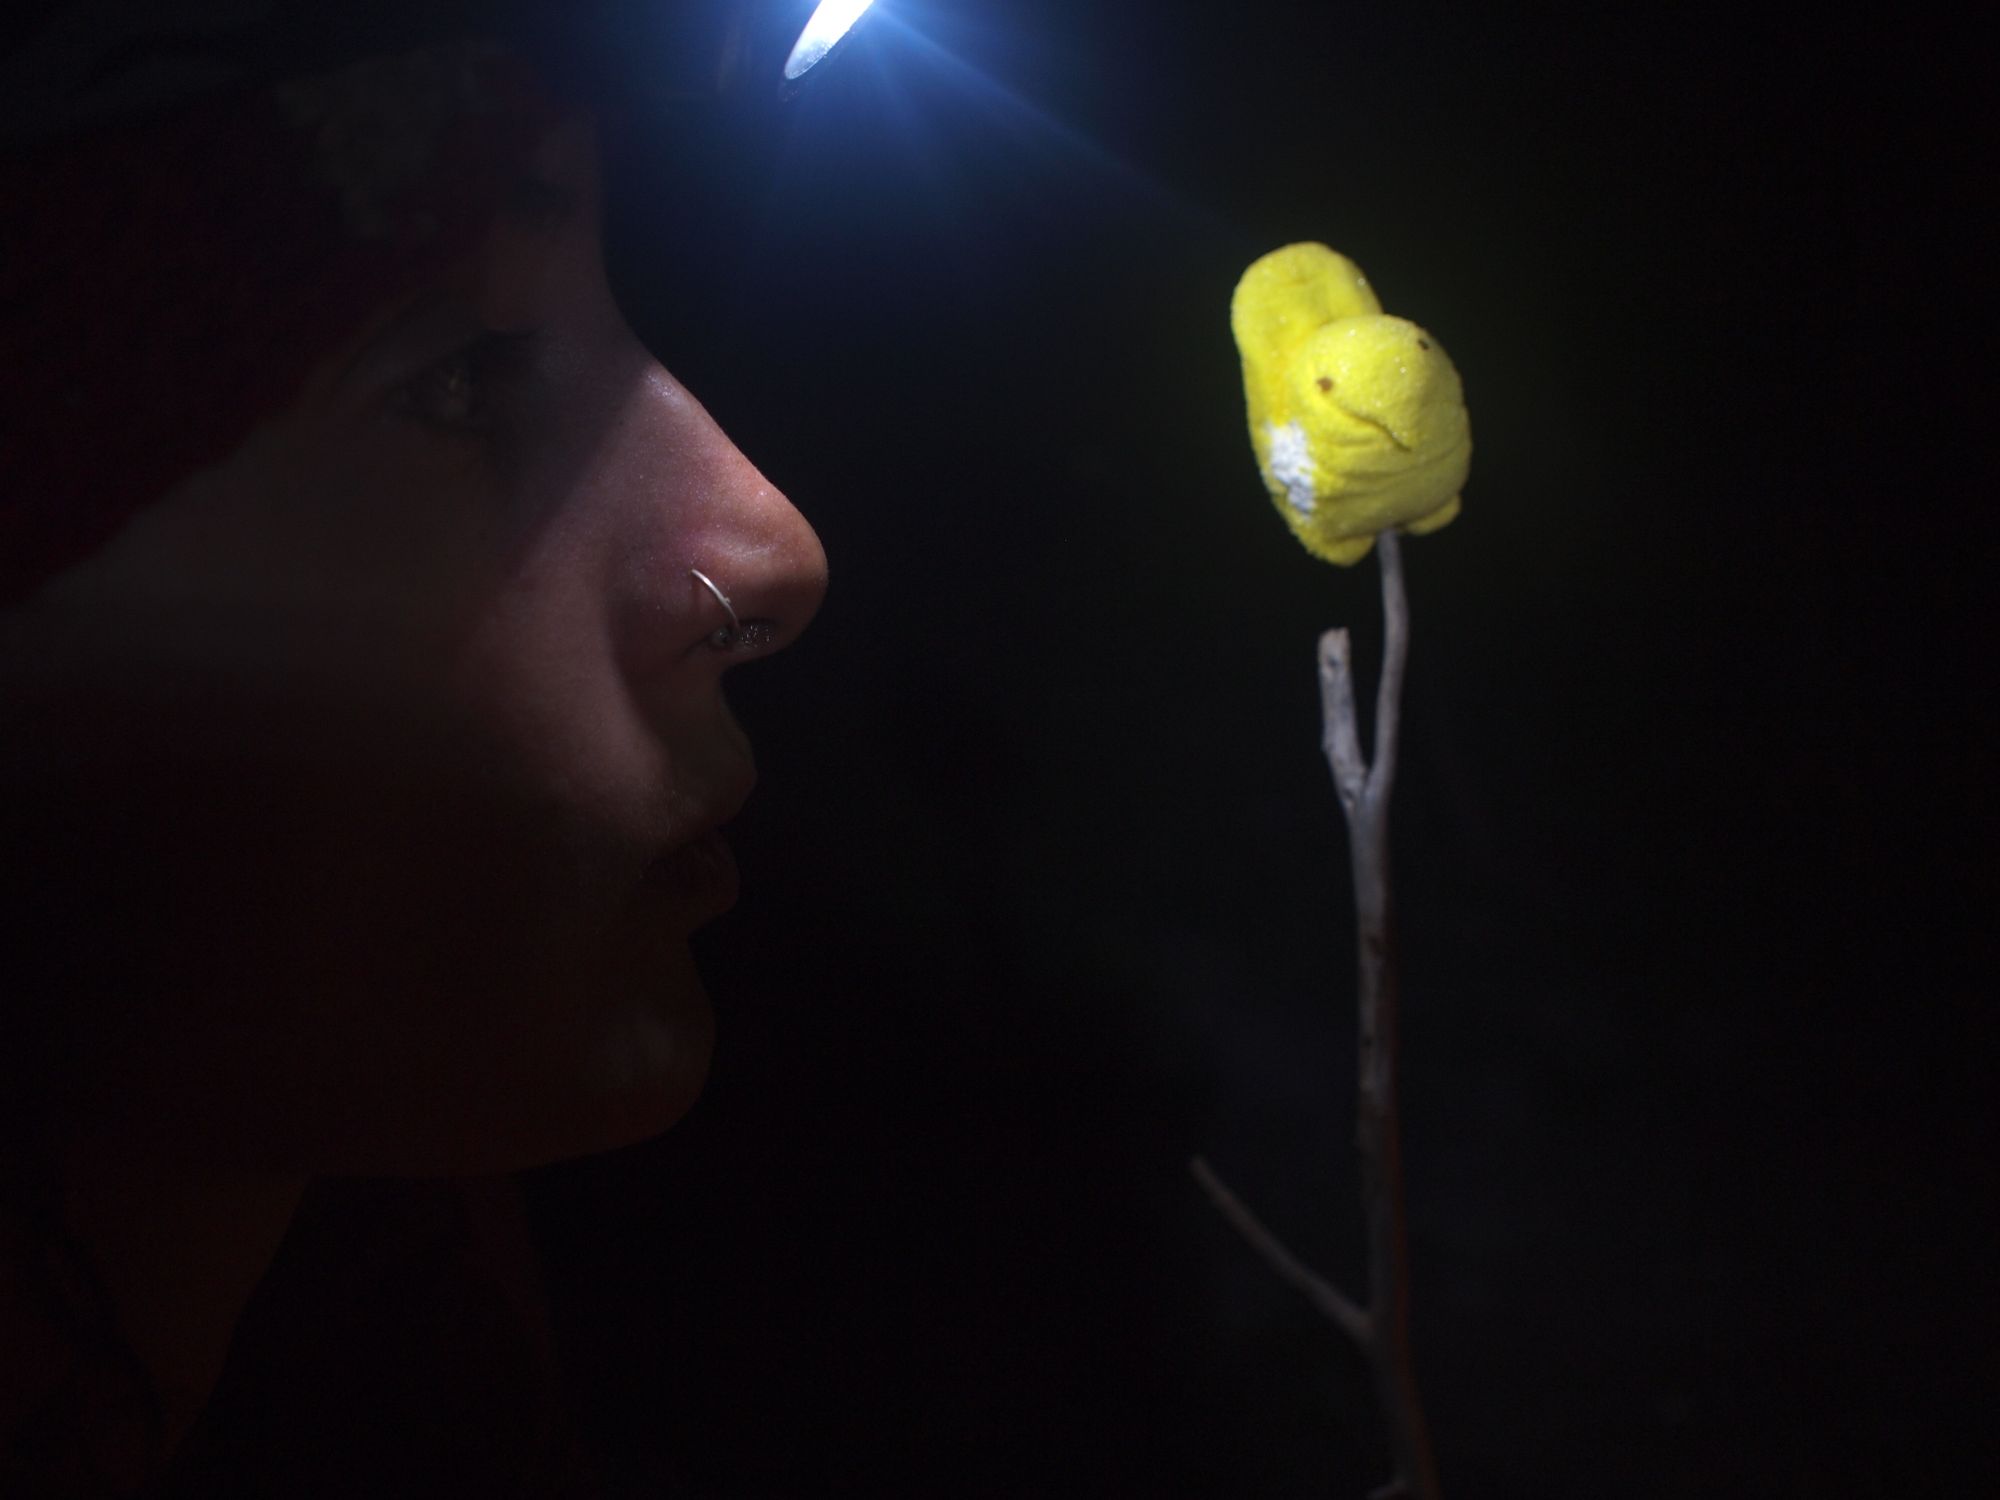 profile of a woman at night wearing a headlamp, holding a yellow marshmallow peep on a stick